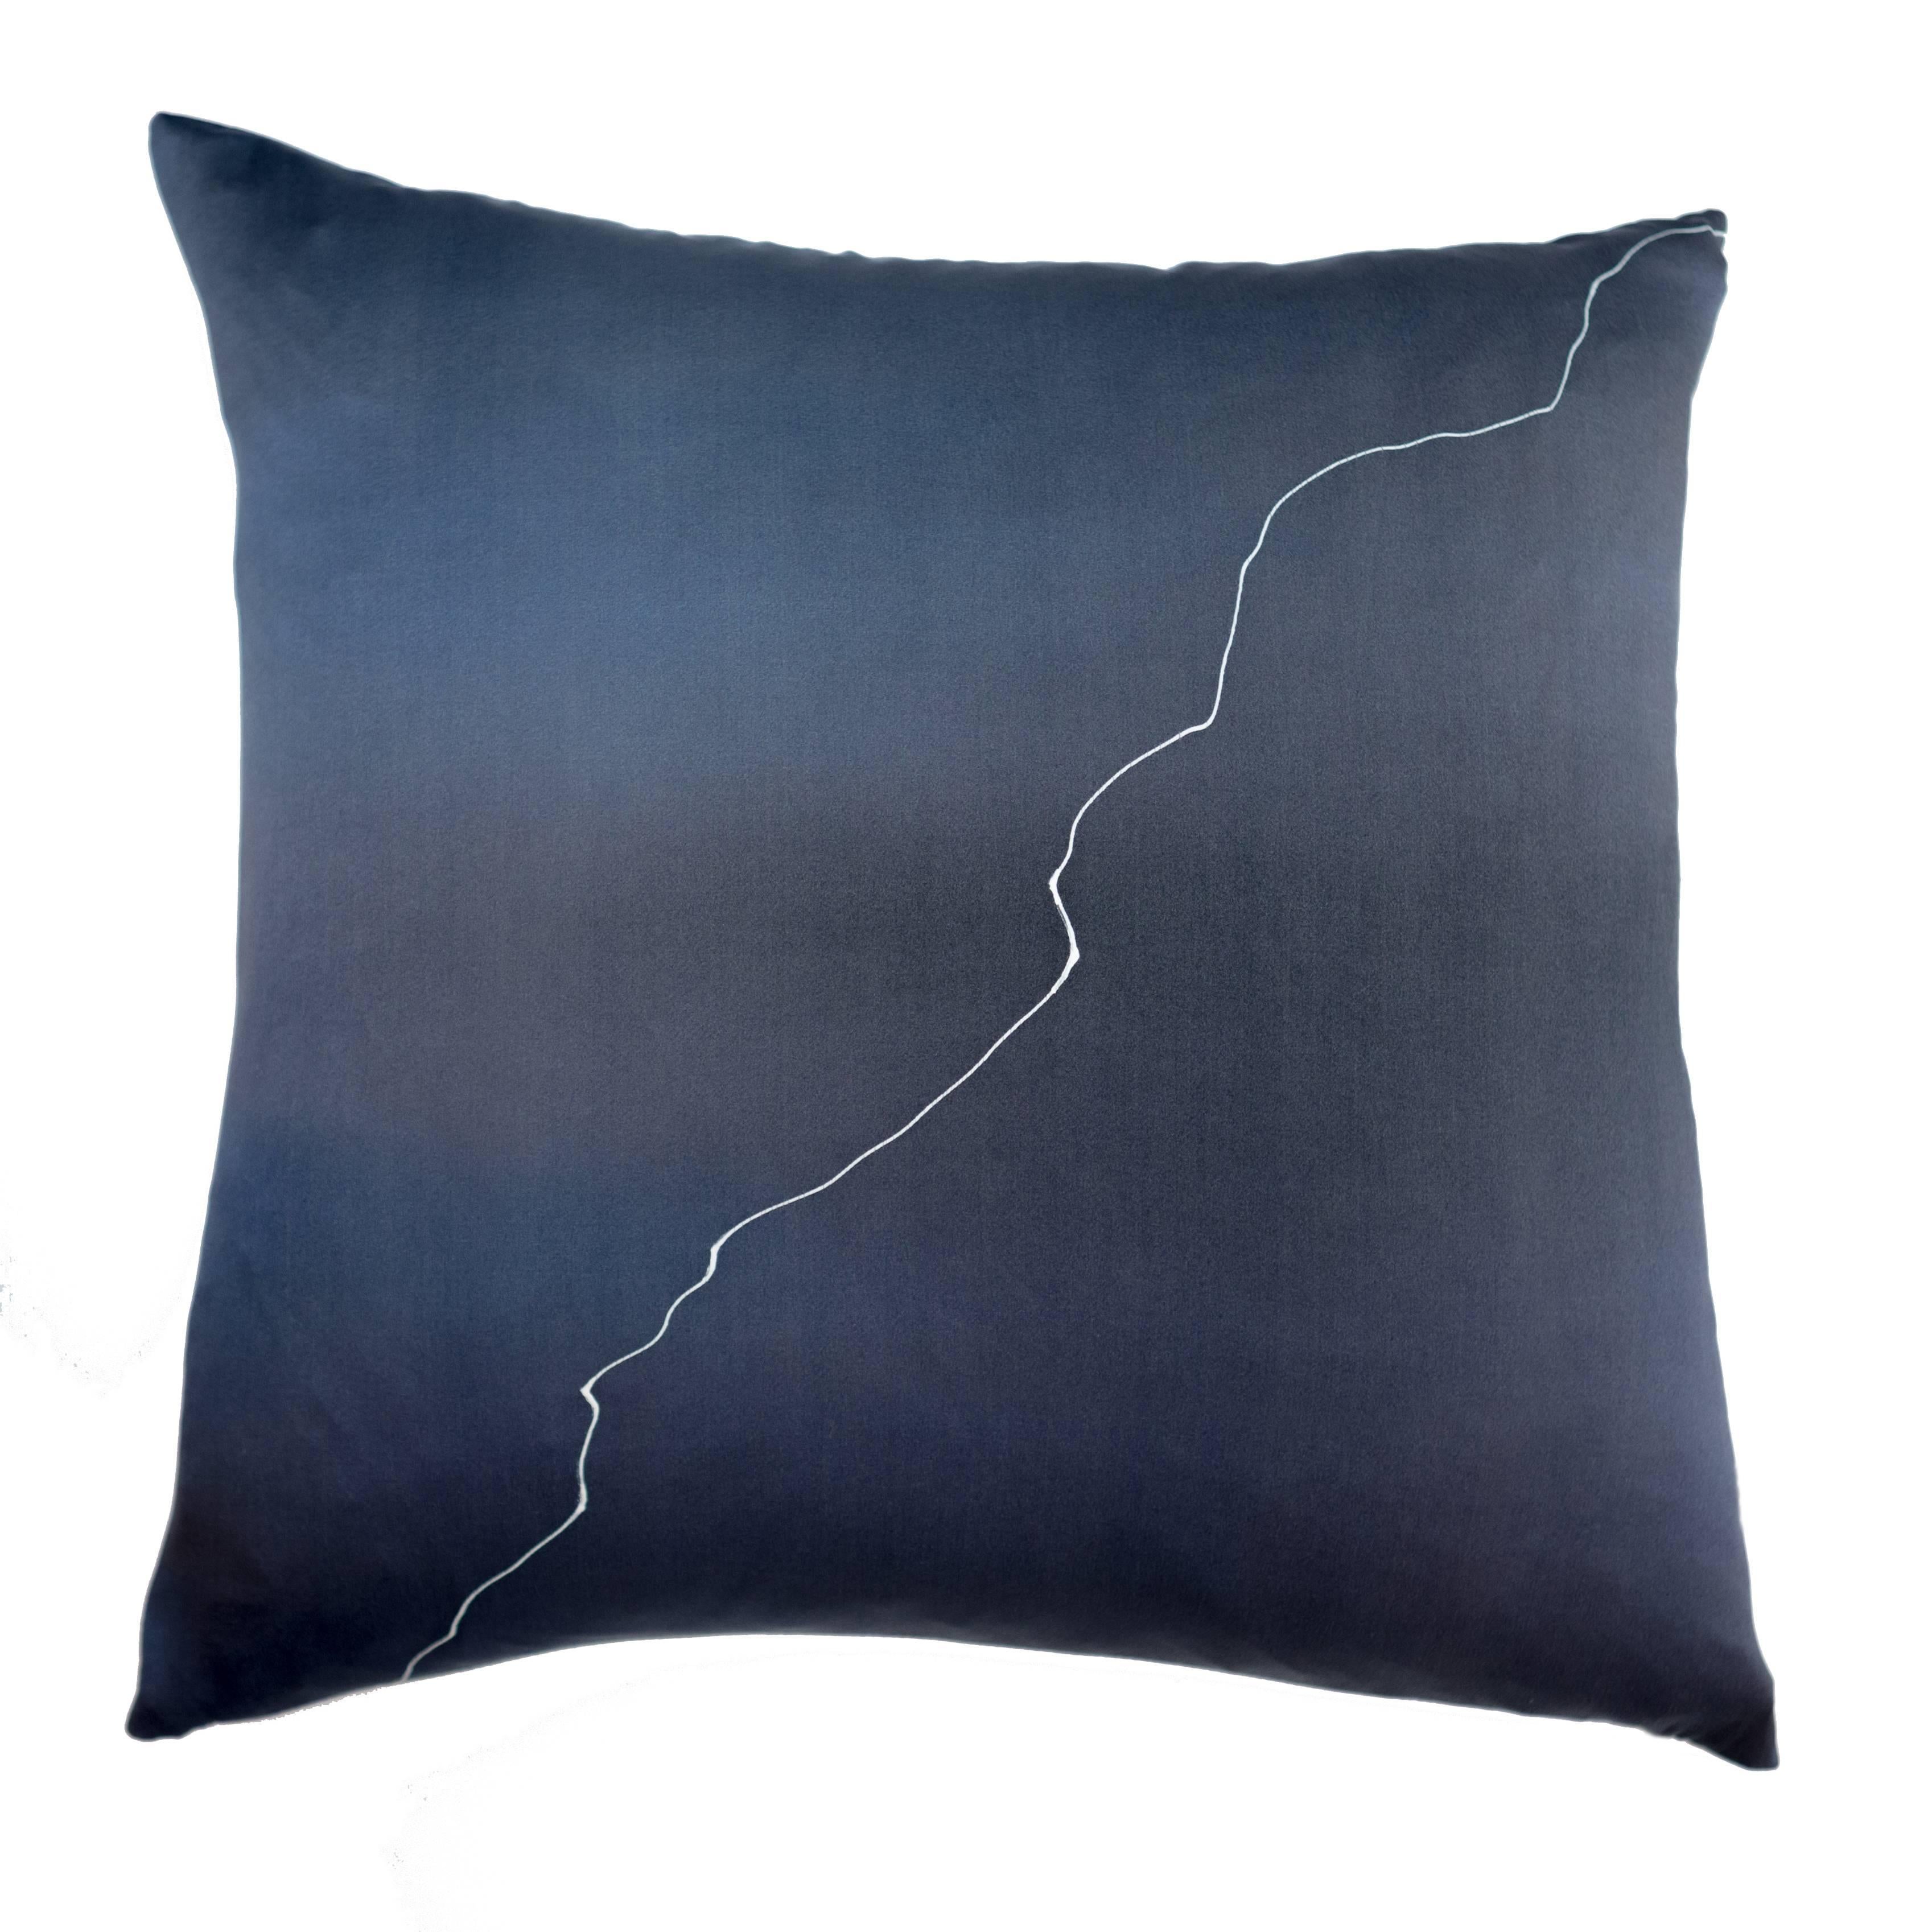 This versatile design in pure white and night indigo silk reflects the opposite energy of the Yin and the Yang. Elegant and Minimalist, the double sided design on silk creates a duality that is also the symbol of those two inseparable forces.

